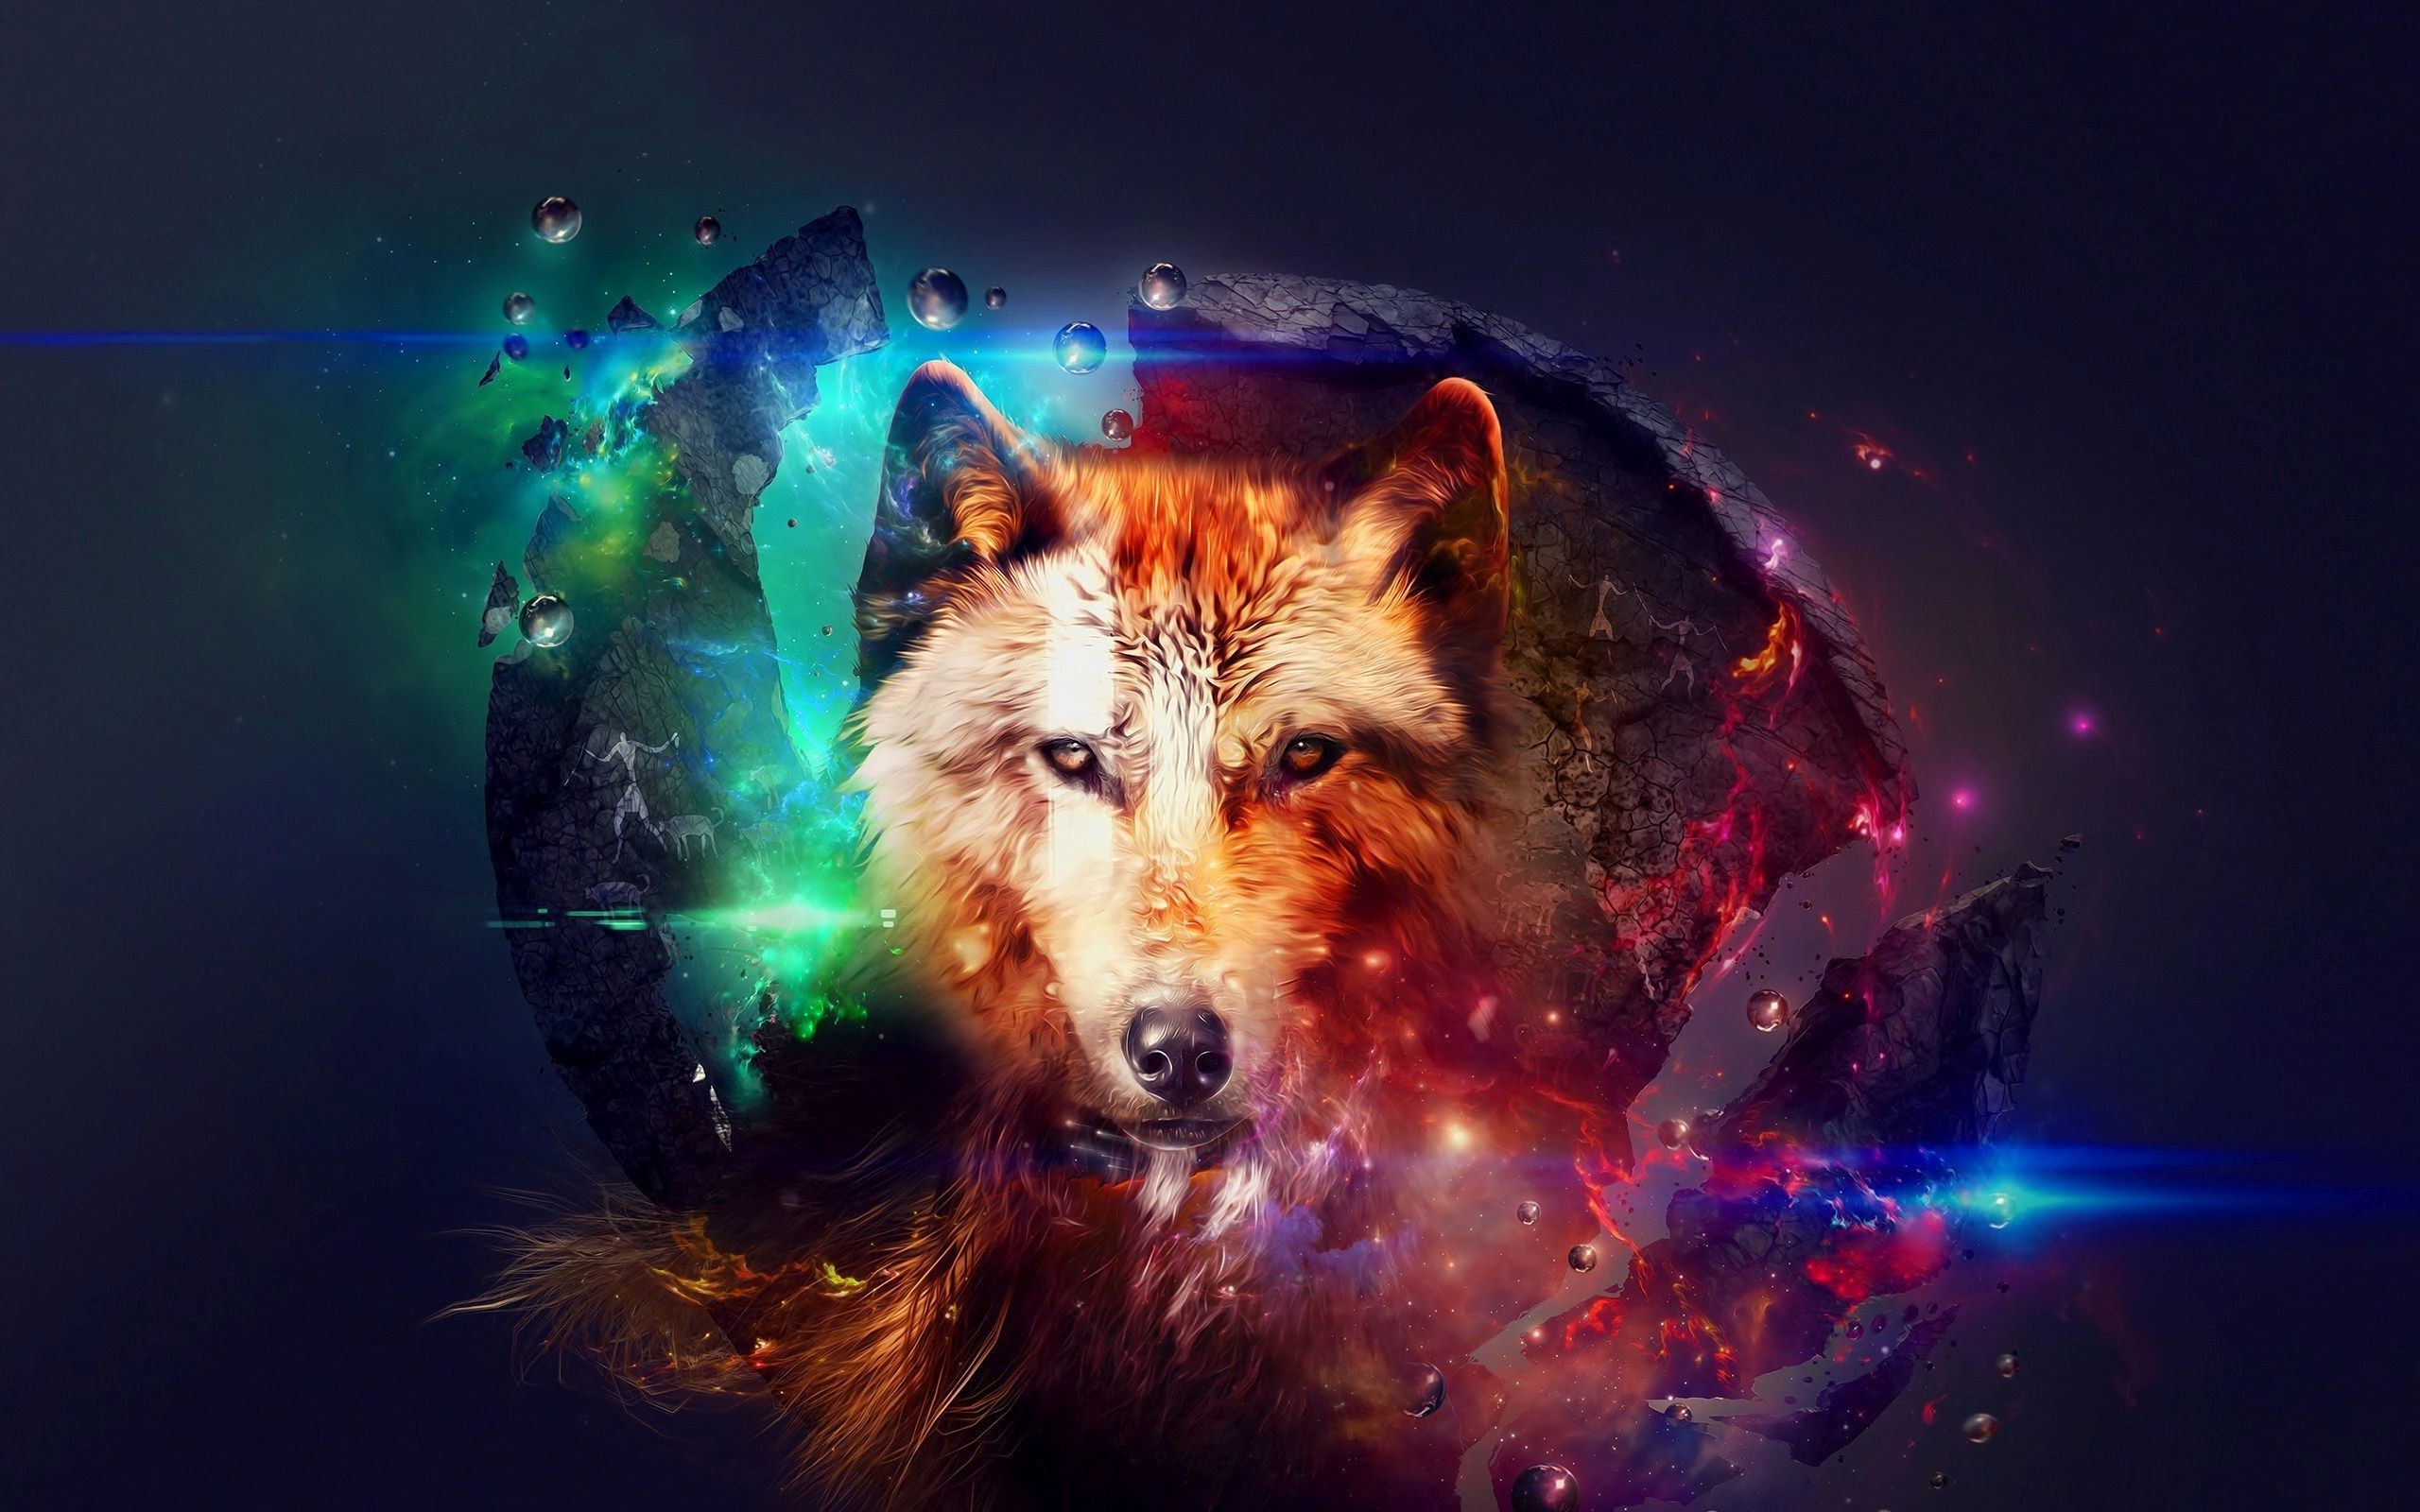 Free Download Galaxy Wolf Wallpaper 69 Images 2560x1600 For Your Desktop Mobile Tablet Explore 29 Black Wolf Galaxy Wallpapers Black Wolf Galaxy Wallpapers Galaxy Wolf Wallpaper Black Wolf Wallpaper